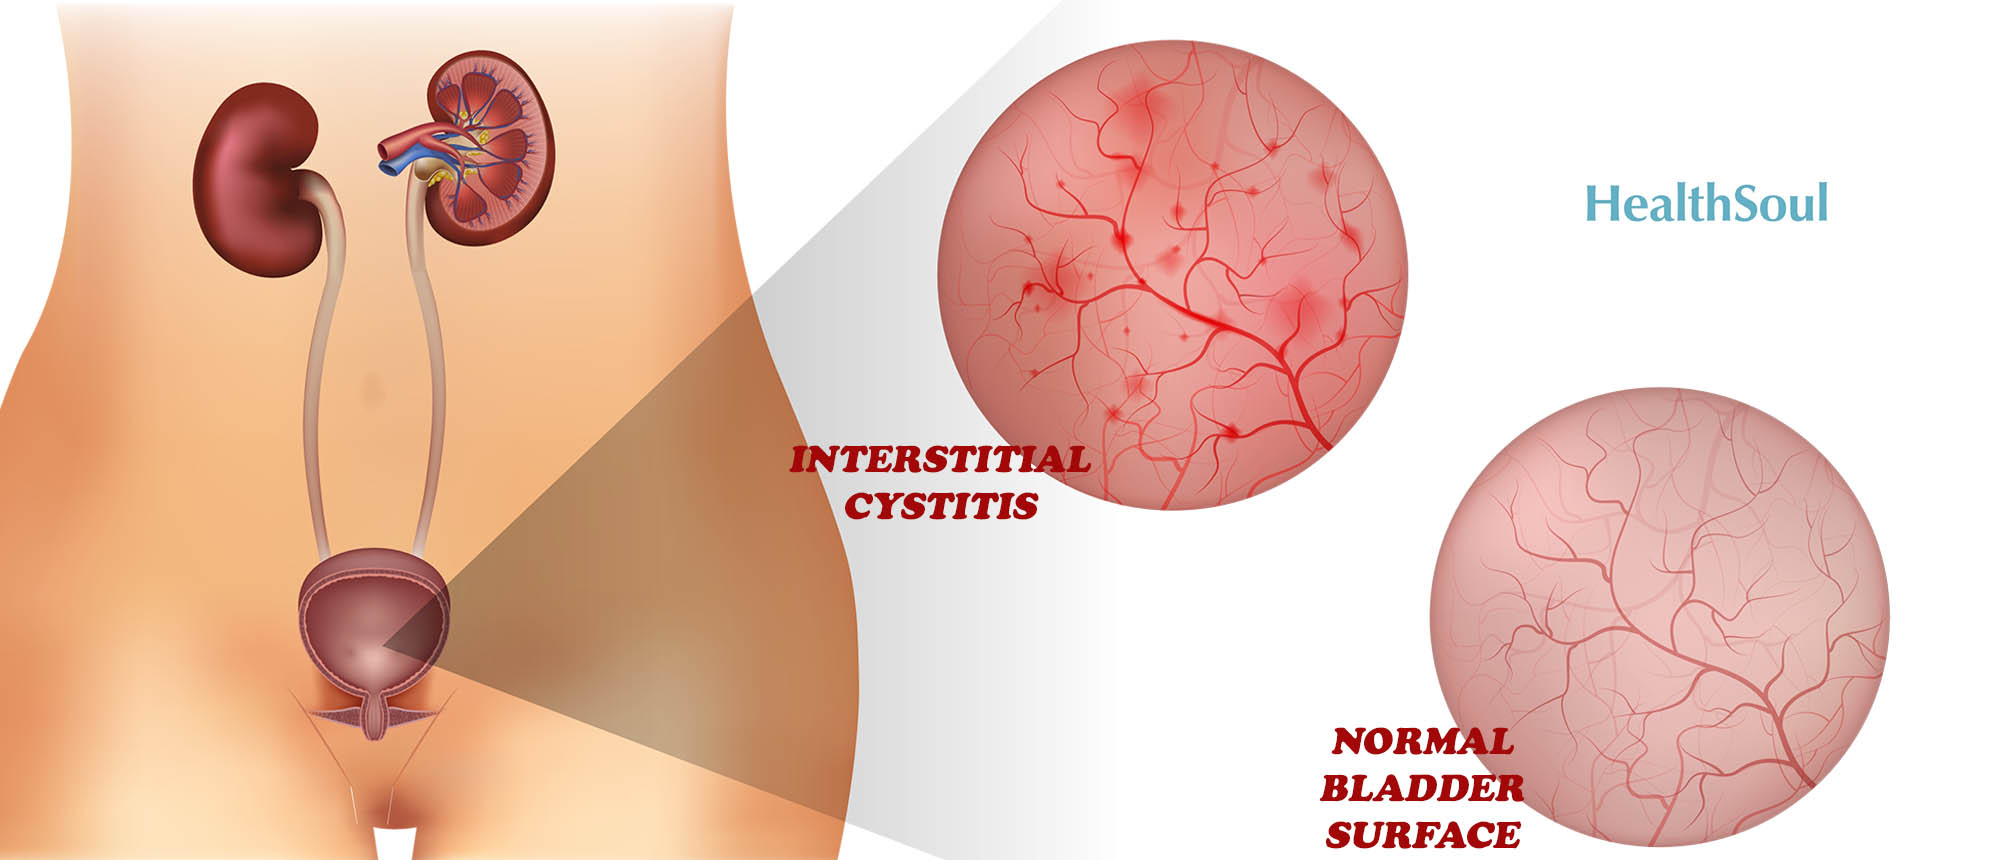 What Relieves Interstitial Cystitis? | HealthSoul